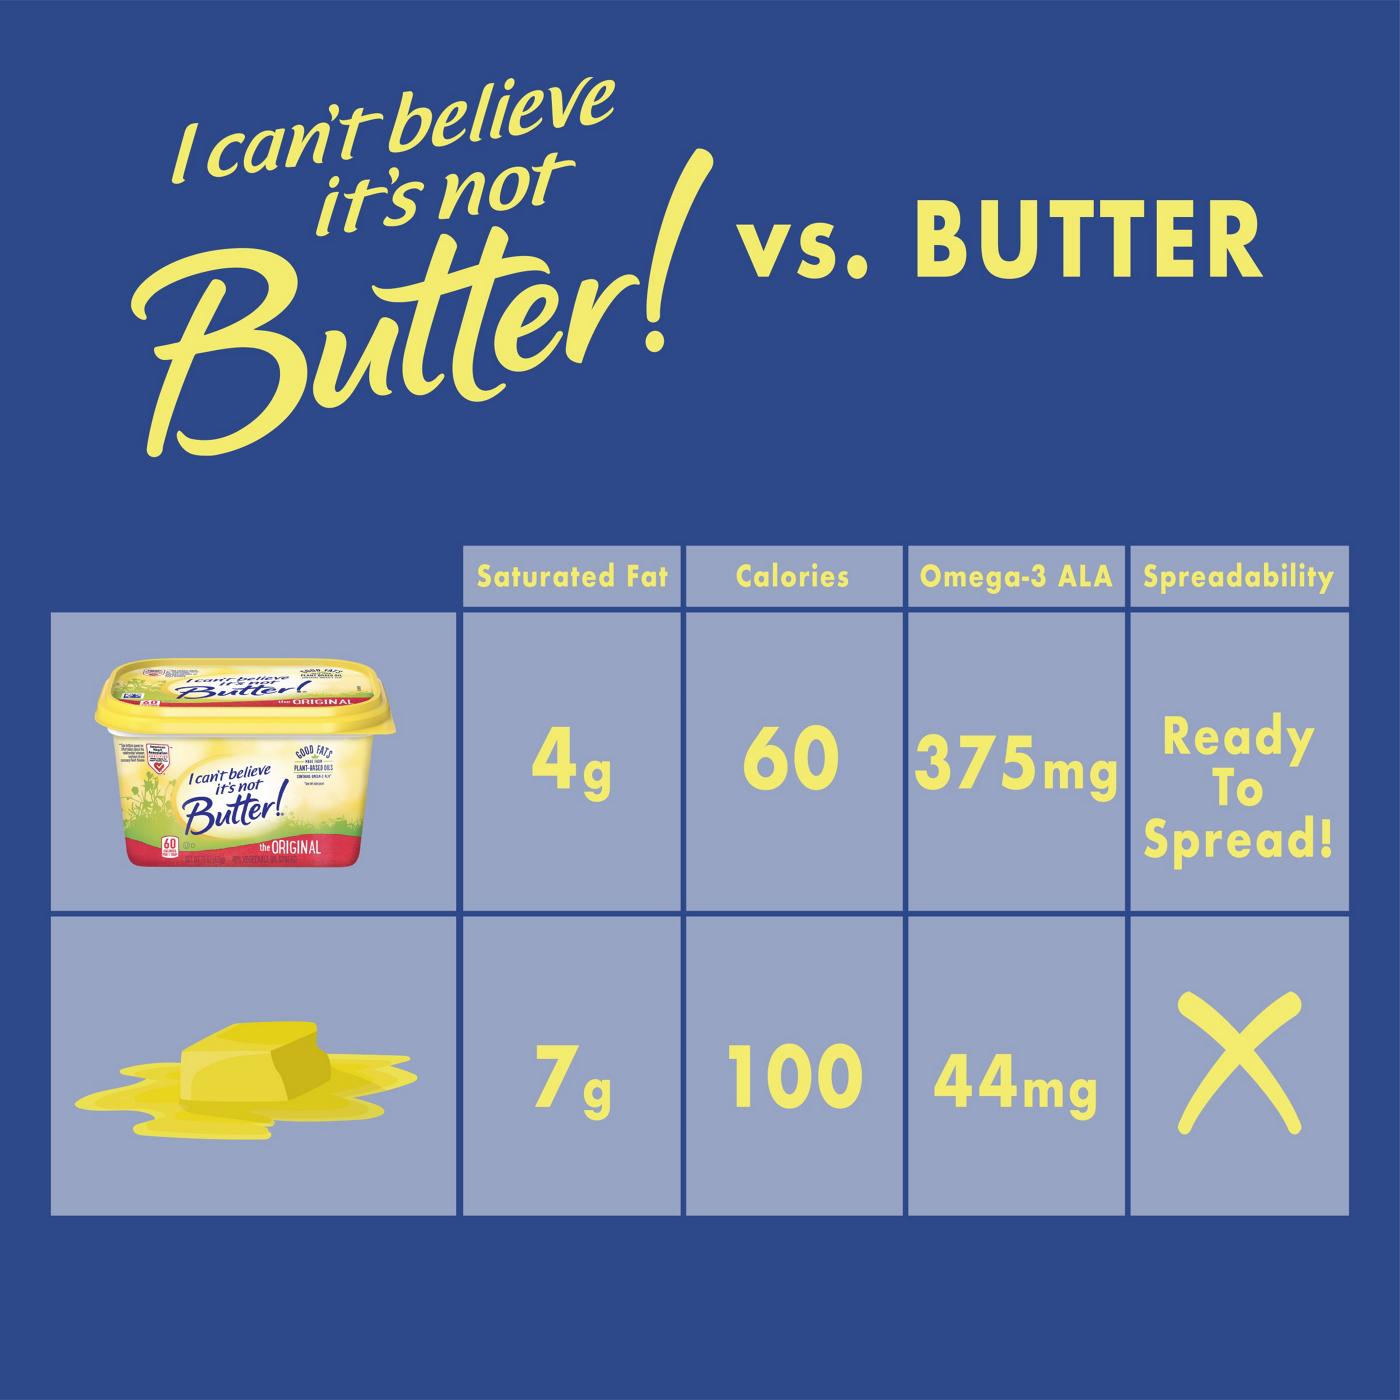 I Can't Believe It's Not Butter! Original Spread; image 12 of 13